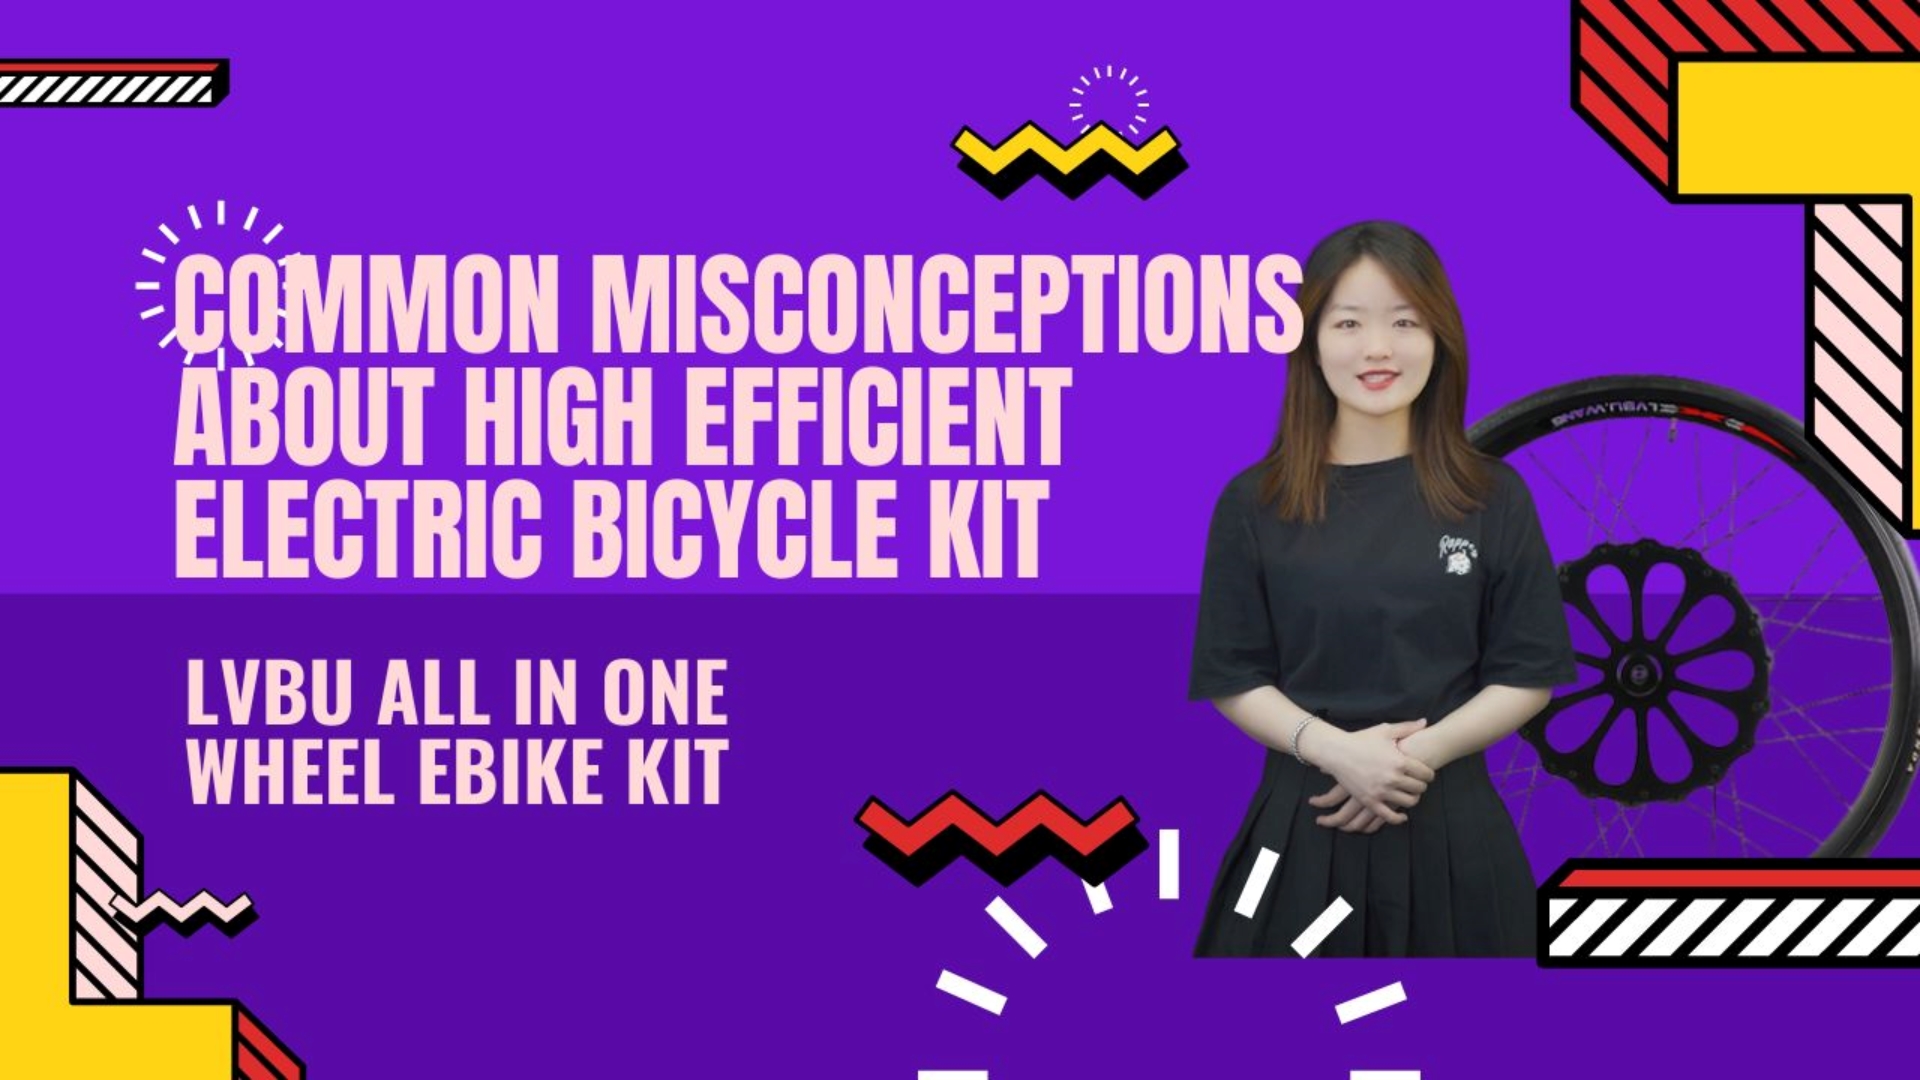 ALL-IN-ONE Ebike kit ‖ Common misconceptions about the use of high efficient electric bicycle kit w